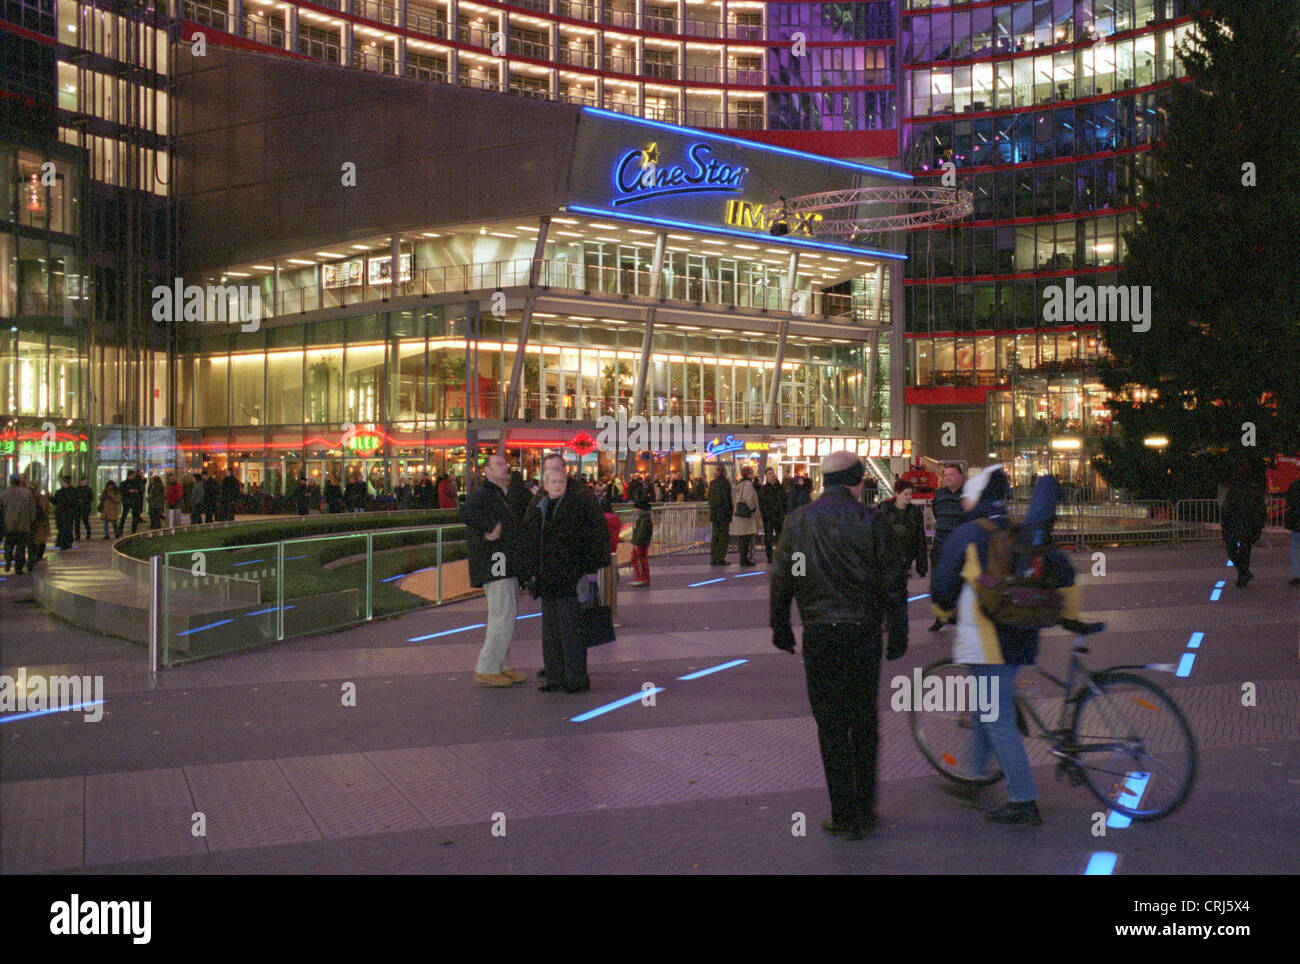 Sony Center and iMax cinema in the evening Stock Photo - Alamy